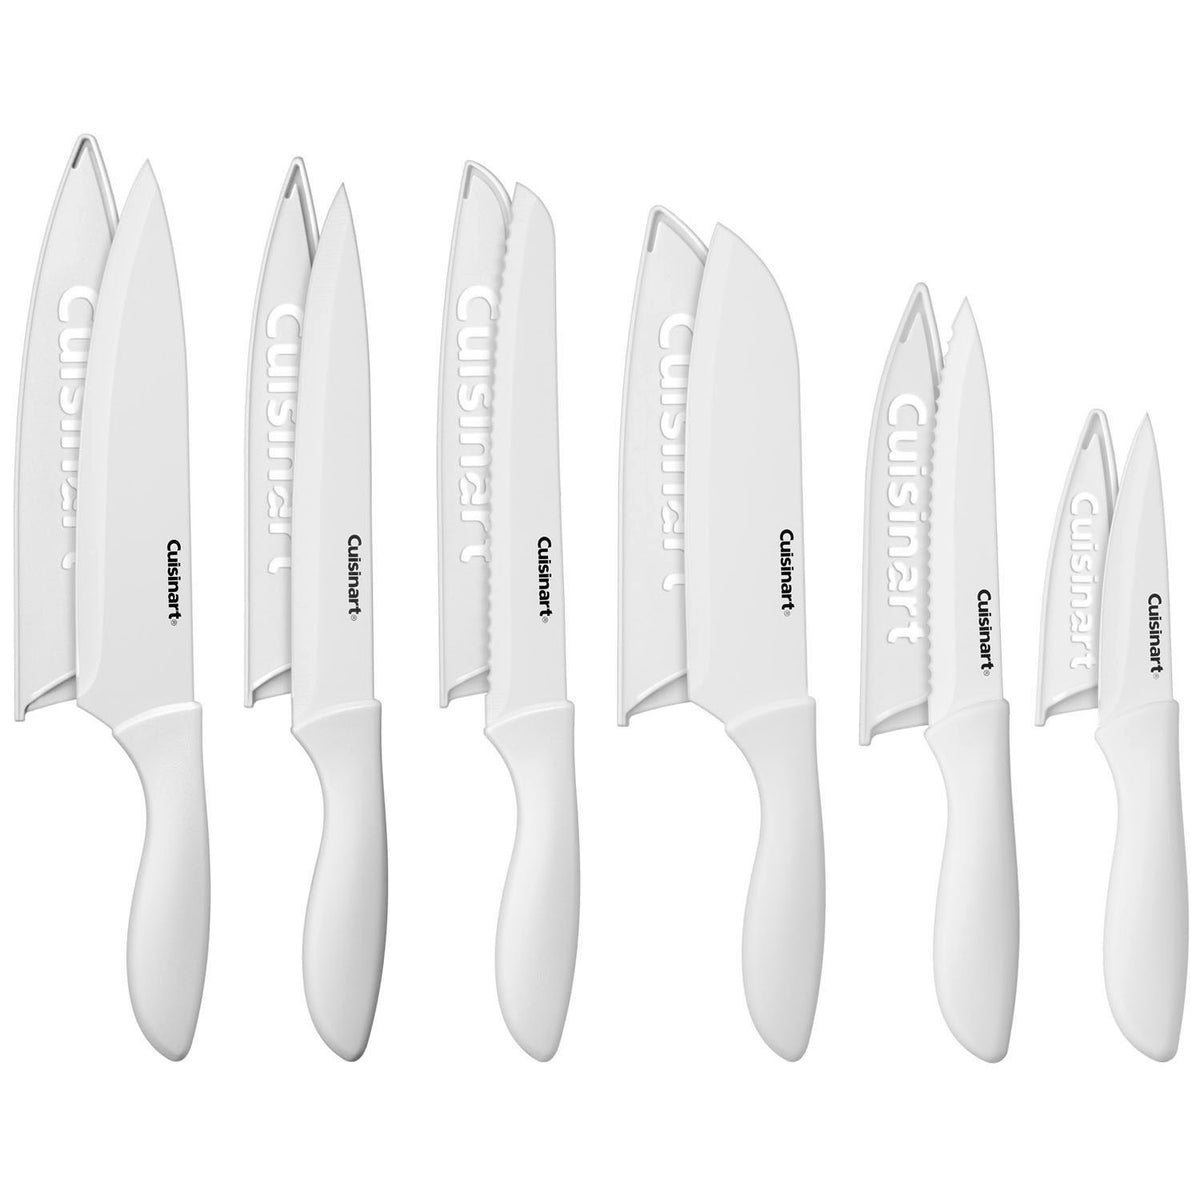 Cuisinart Advantage 10 Piece Ceramic Coated Knife Set with Blade Guards NEW